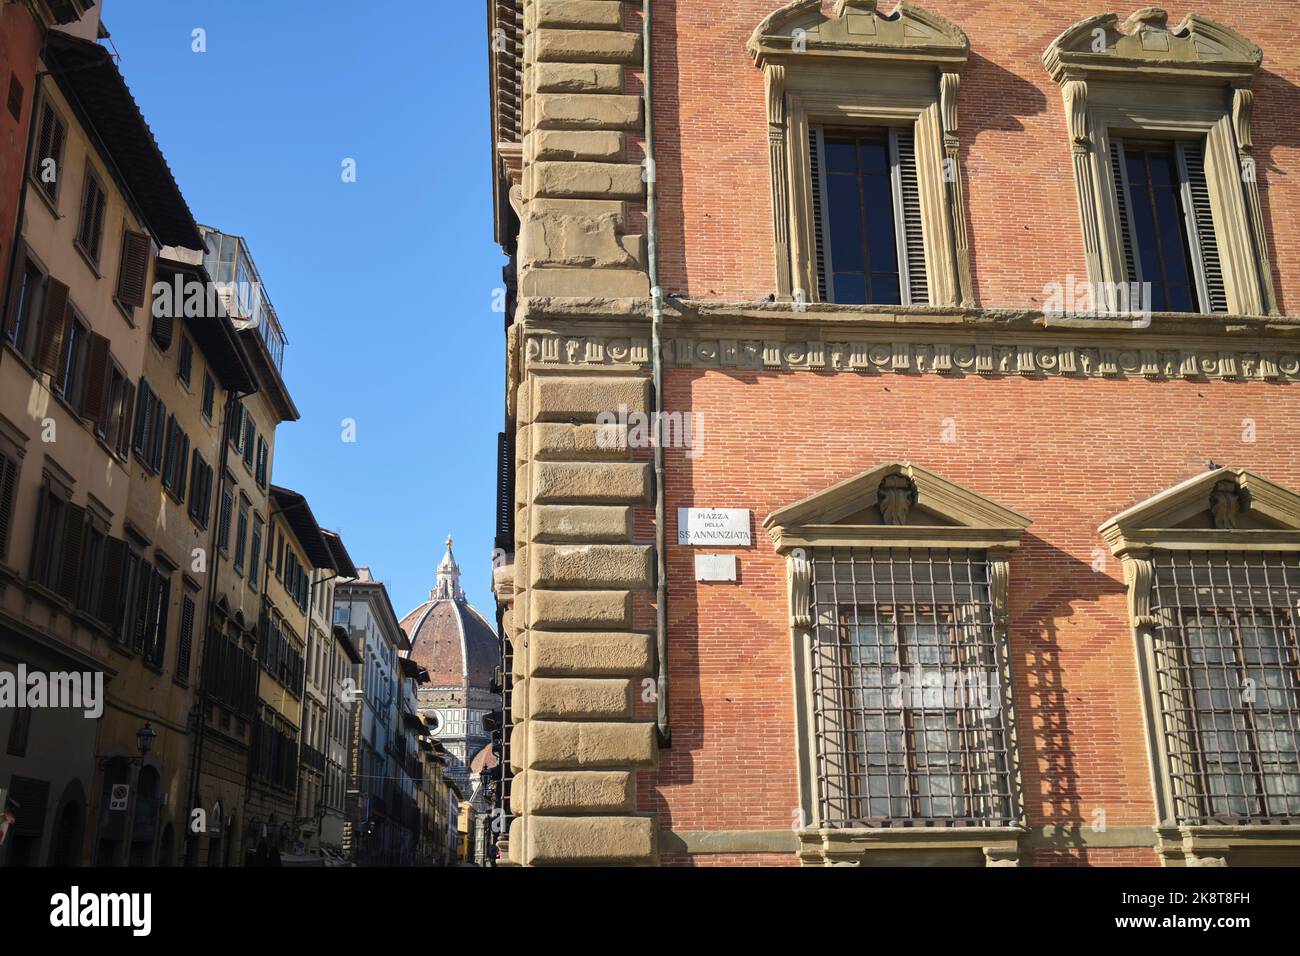 Piazza Annunziata Florence Italy Stock Photo